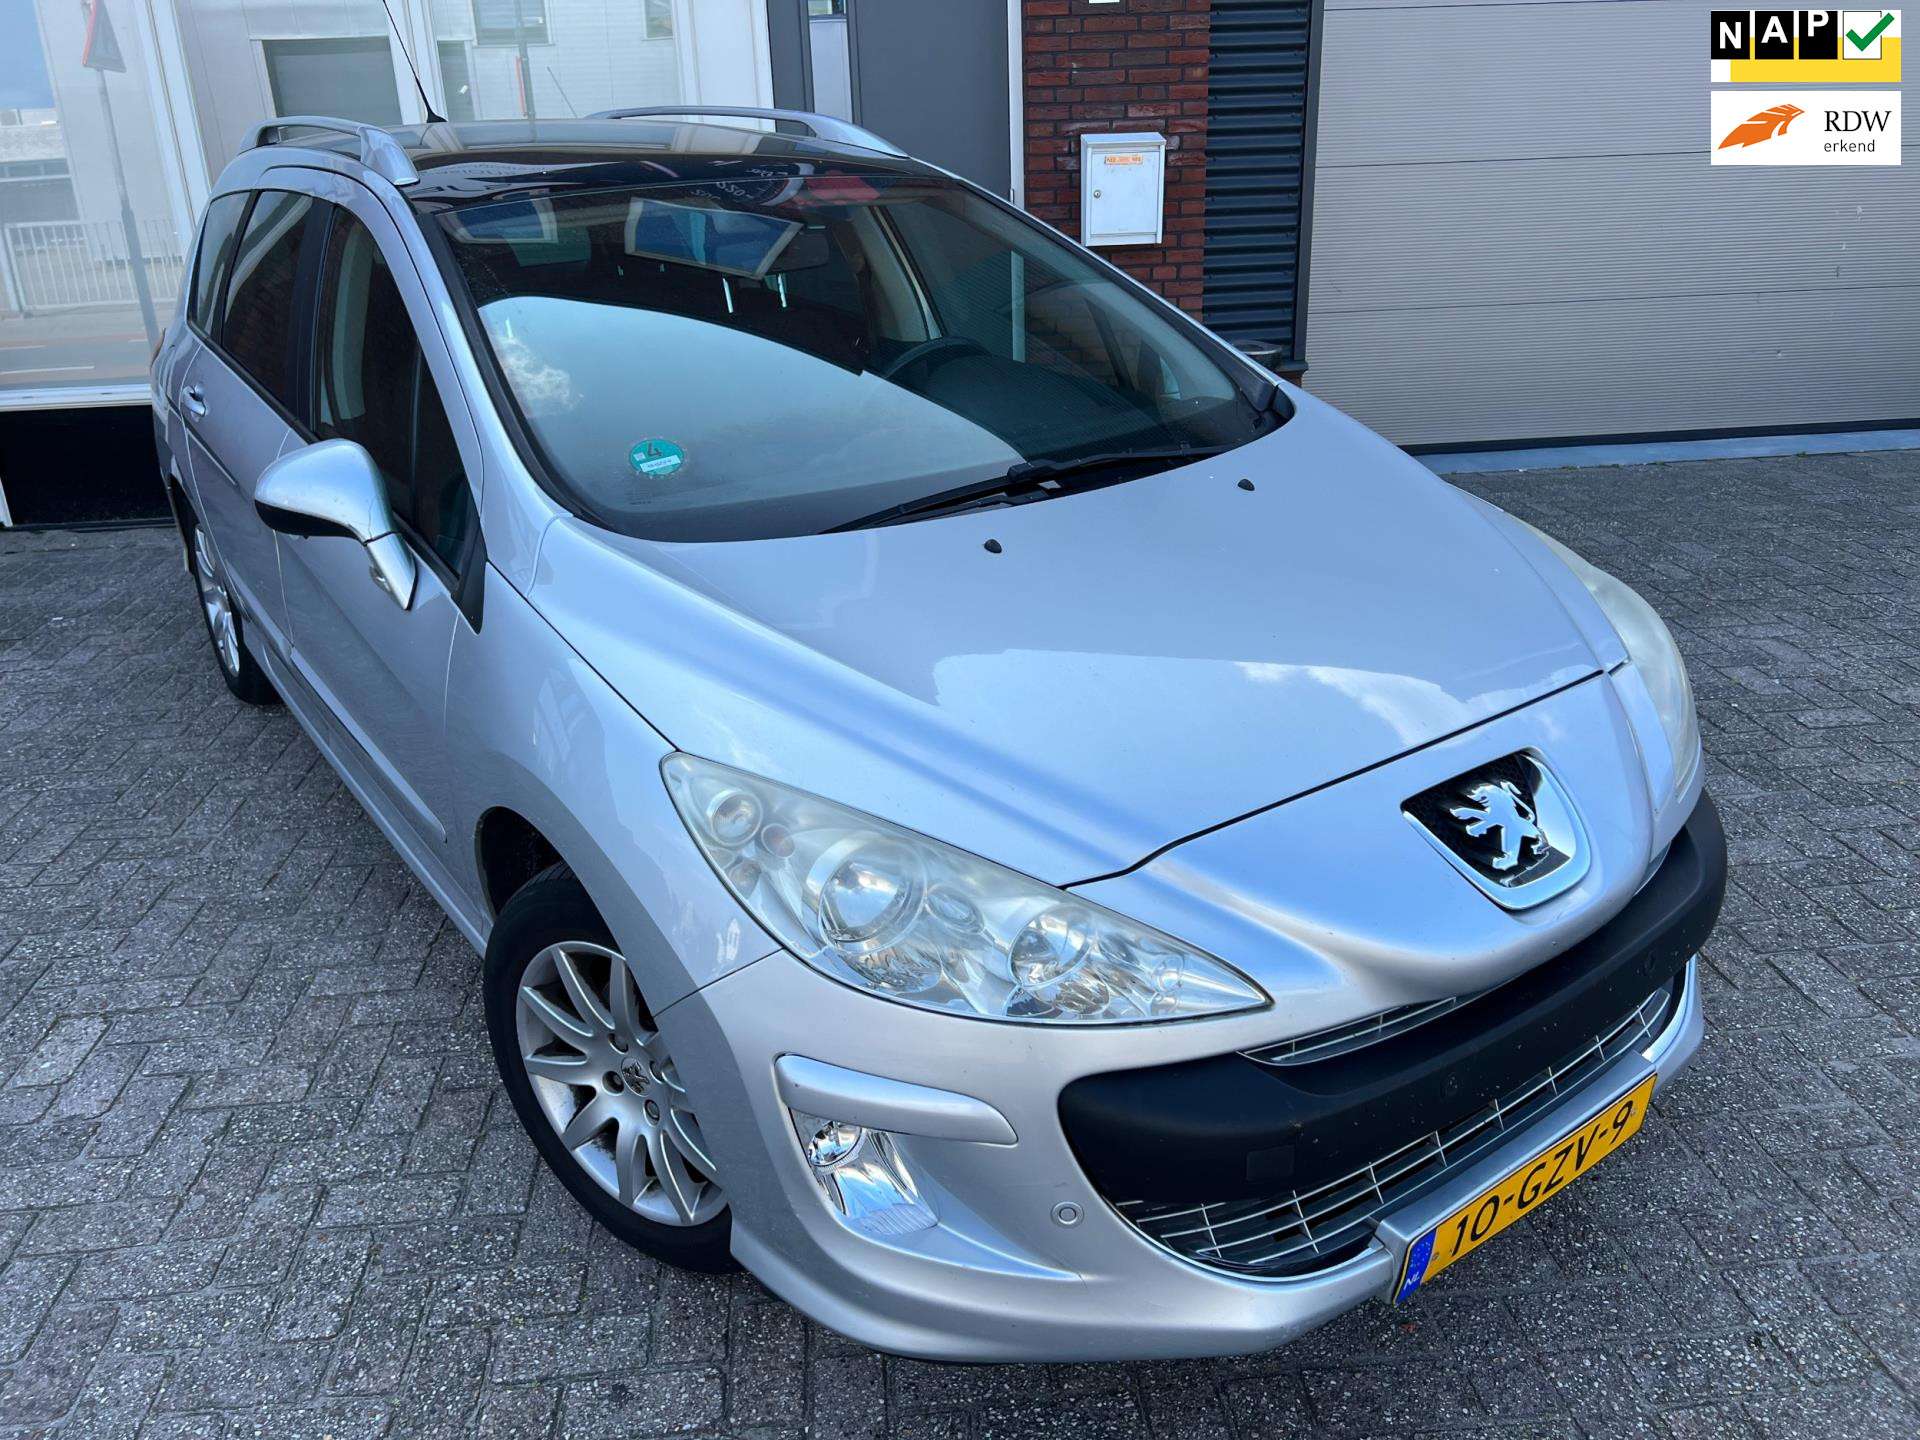 Peugeot 308 Station wagon in Grey used in SPRANG-CAPELLE for € 3,202,800.-